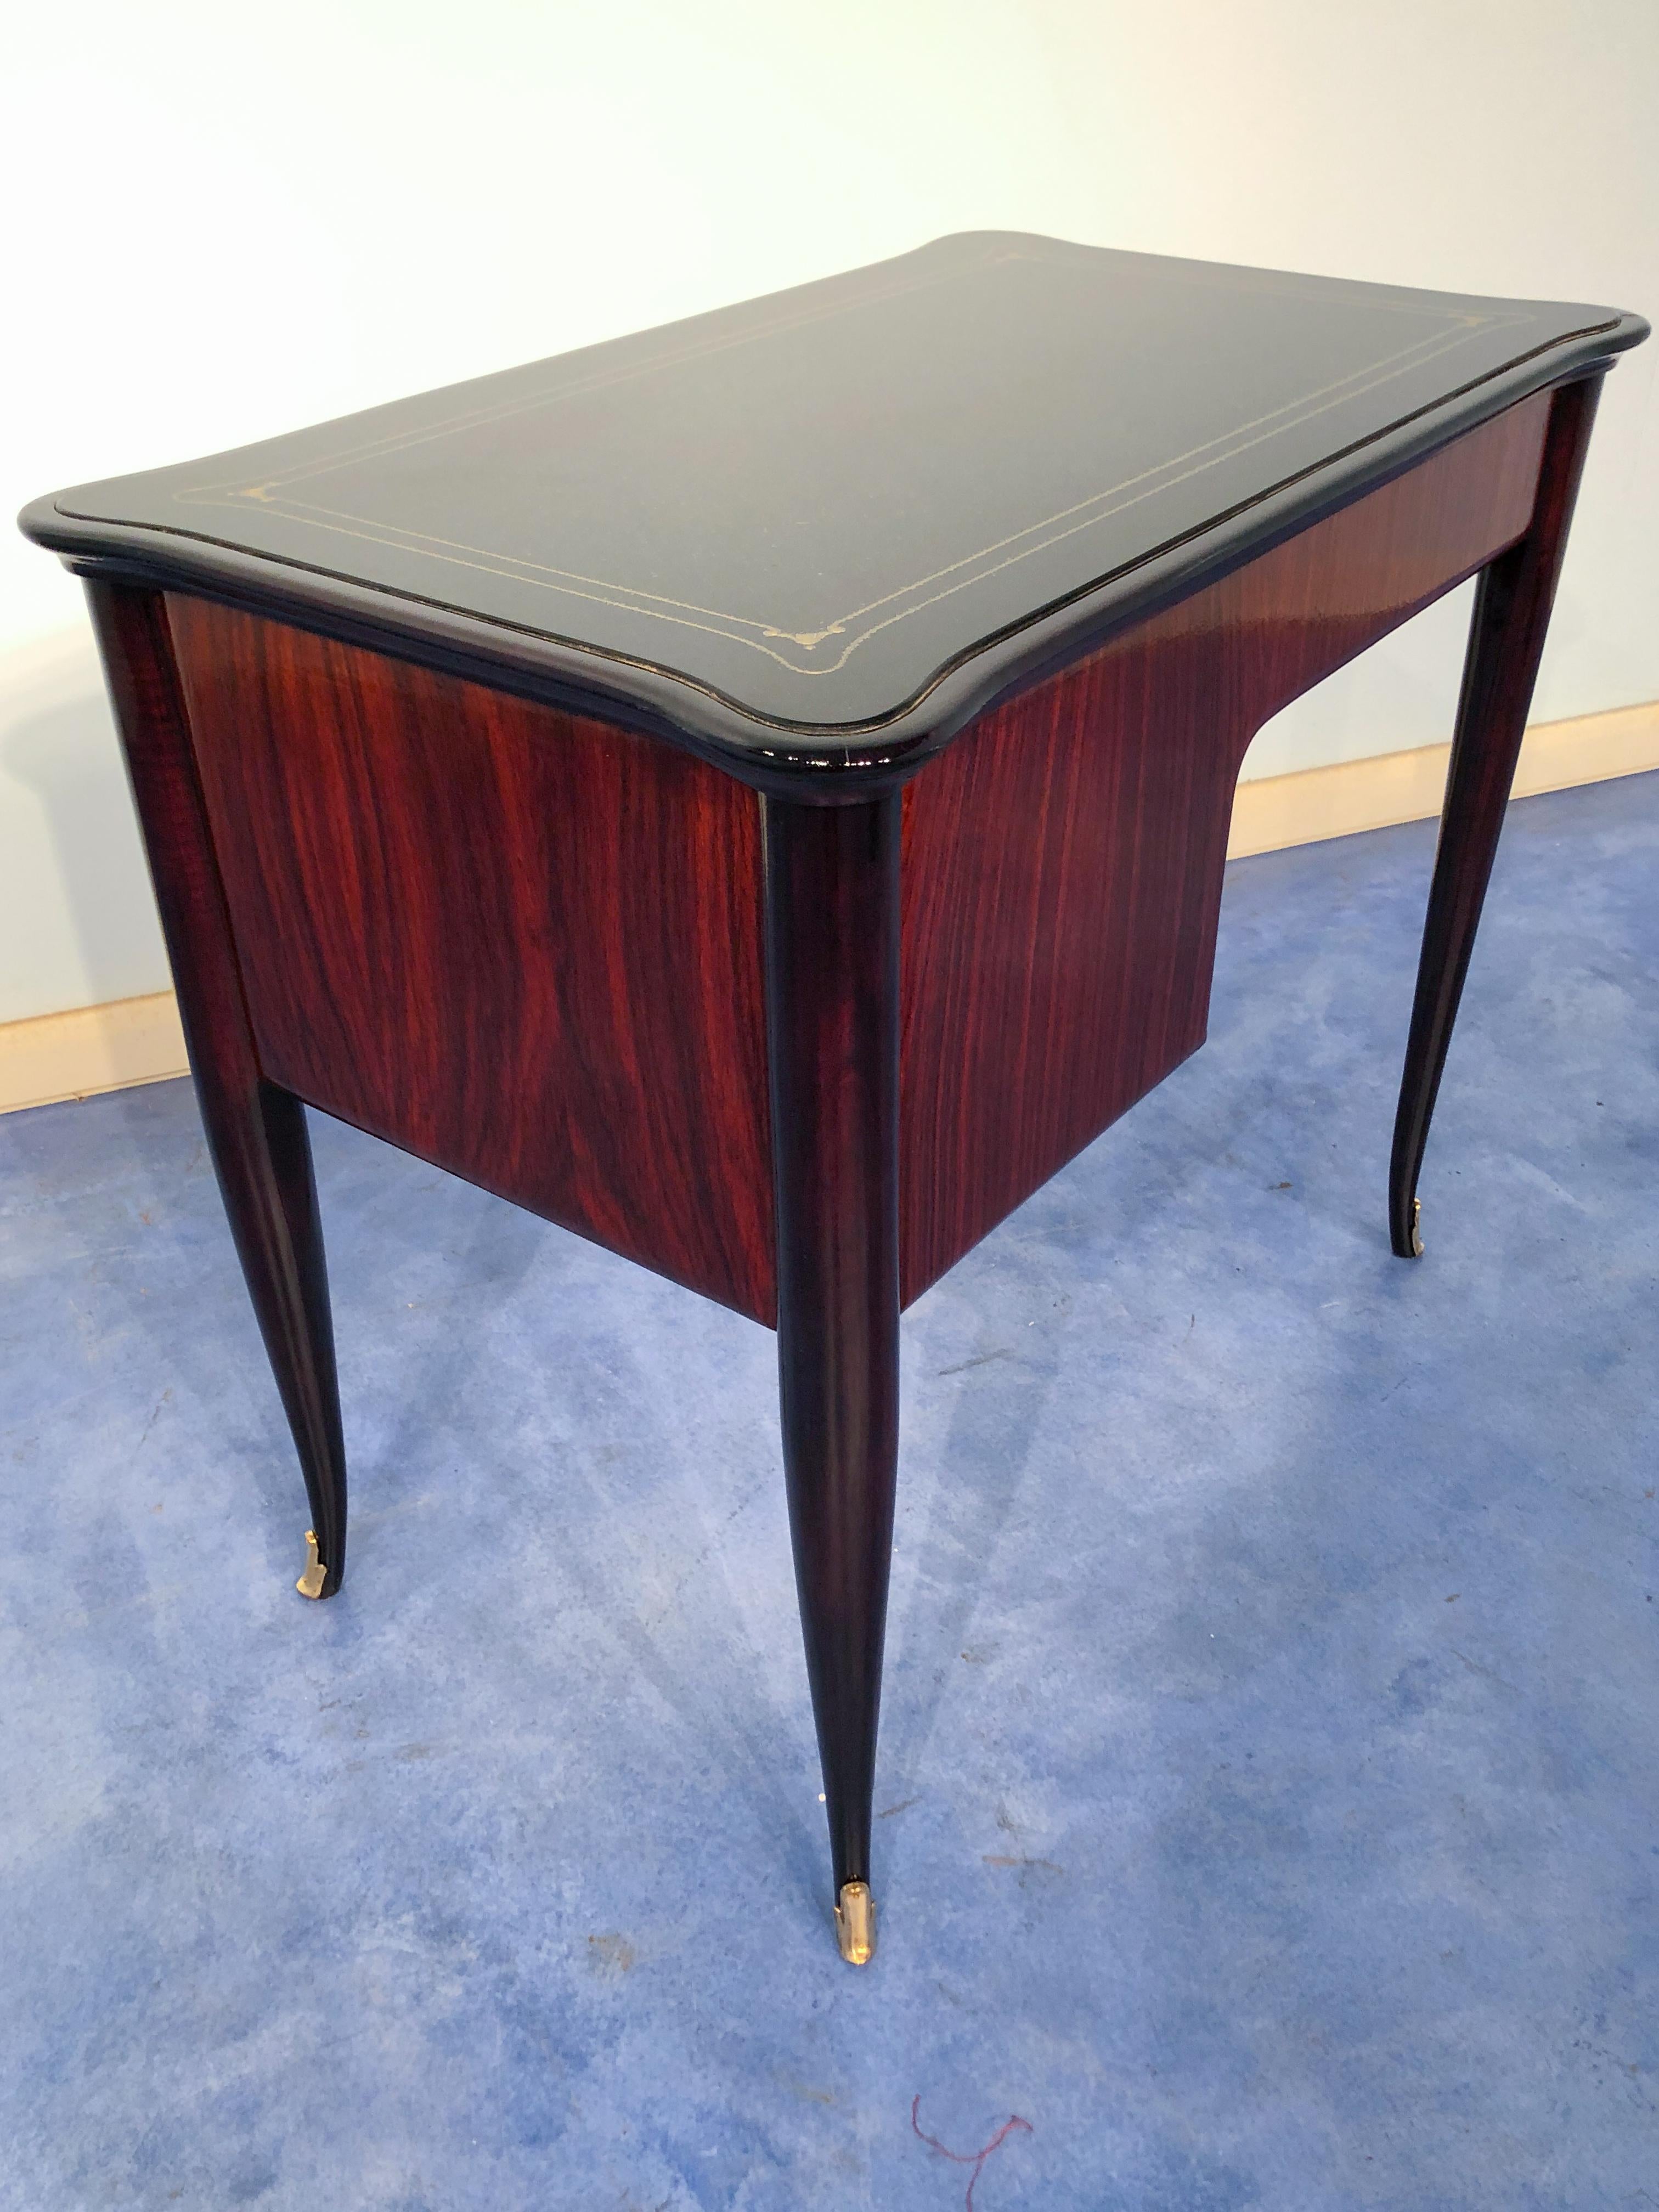 Italian Mid-Century Modern Small Desk and Chair Attributed to Paolo Buffa, 1950s For Sale 3